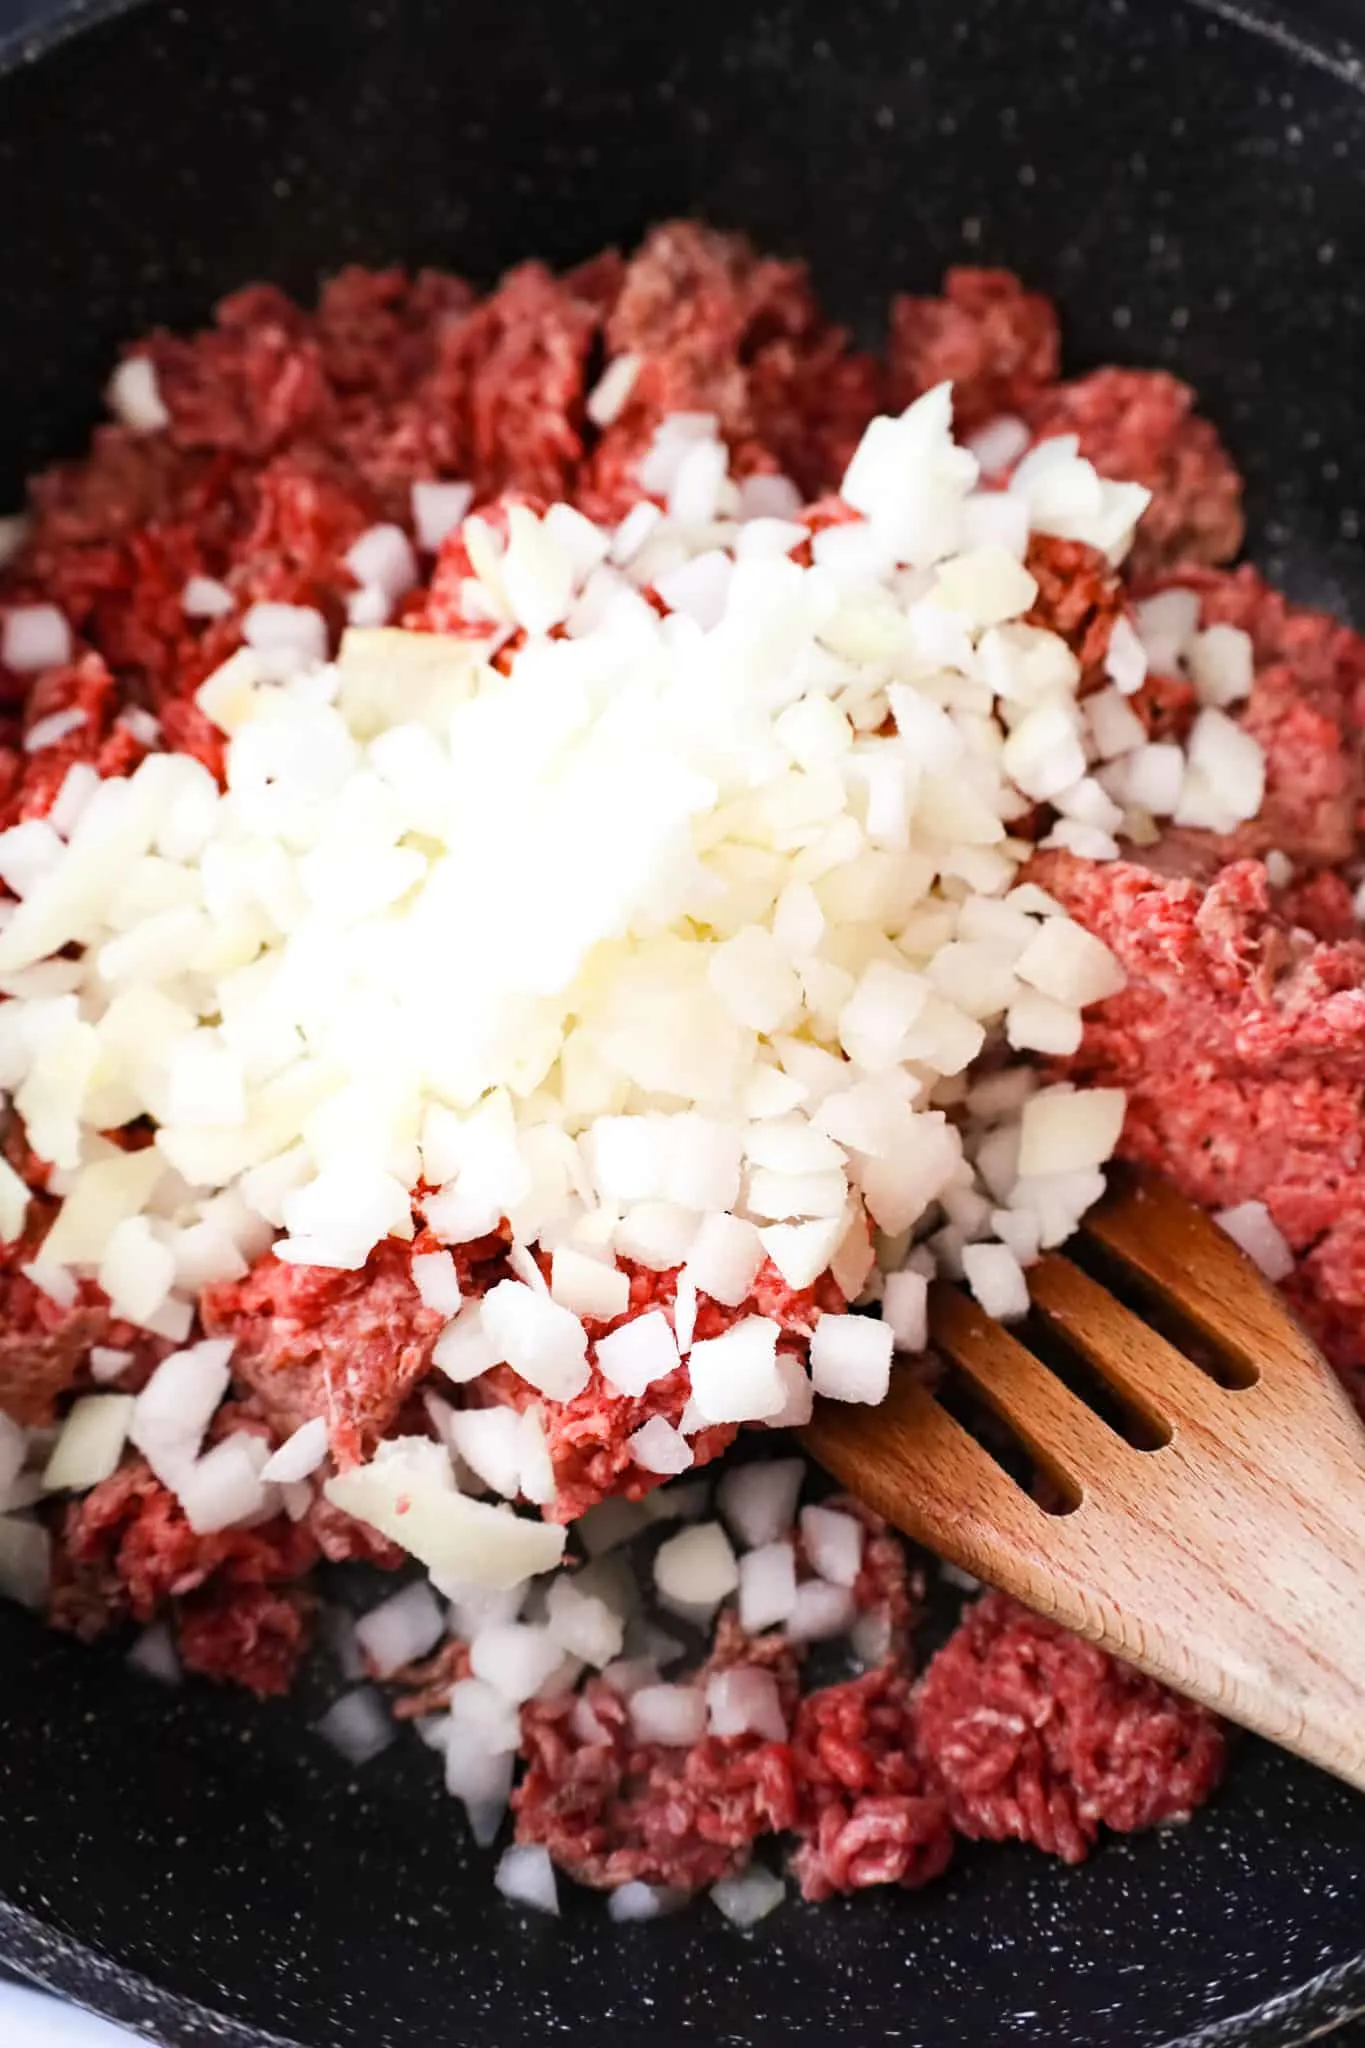 diced onions on top of raw ground beef in a saute pan